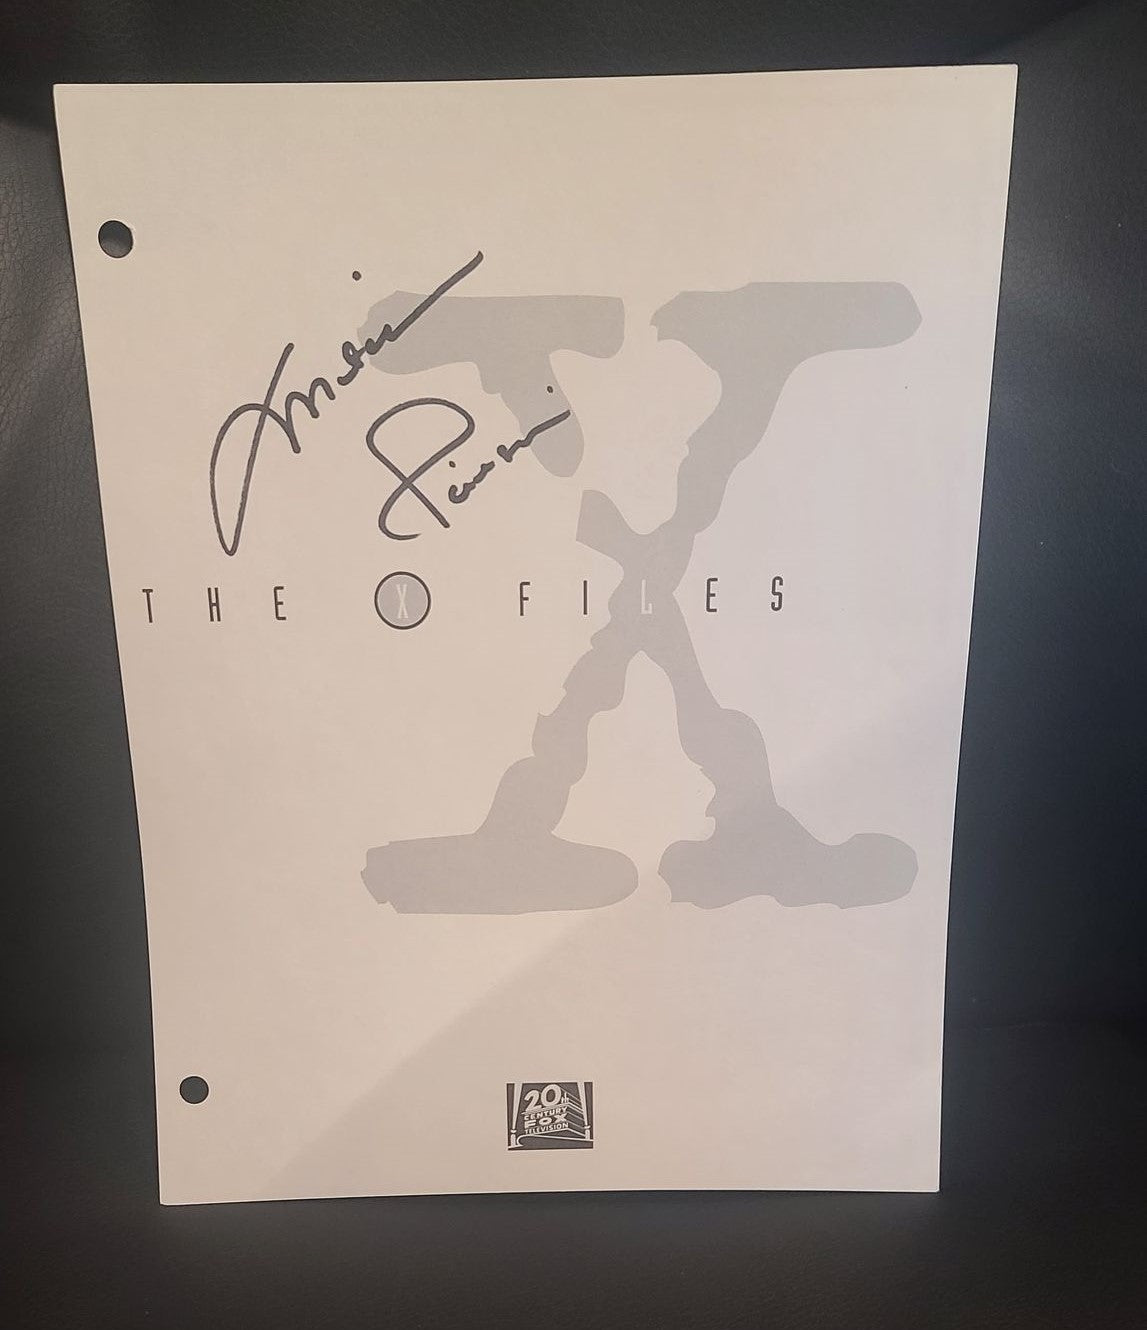 Script cover autographed by Mitch Pileggi - Donated by Chris Carter